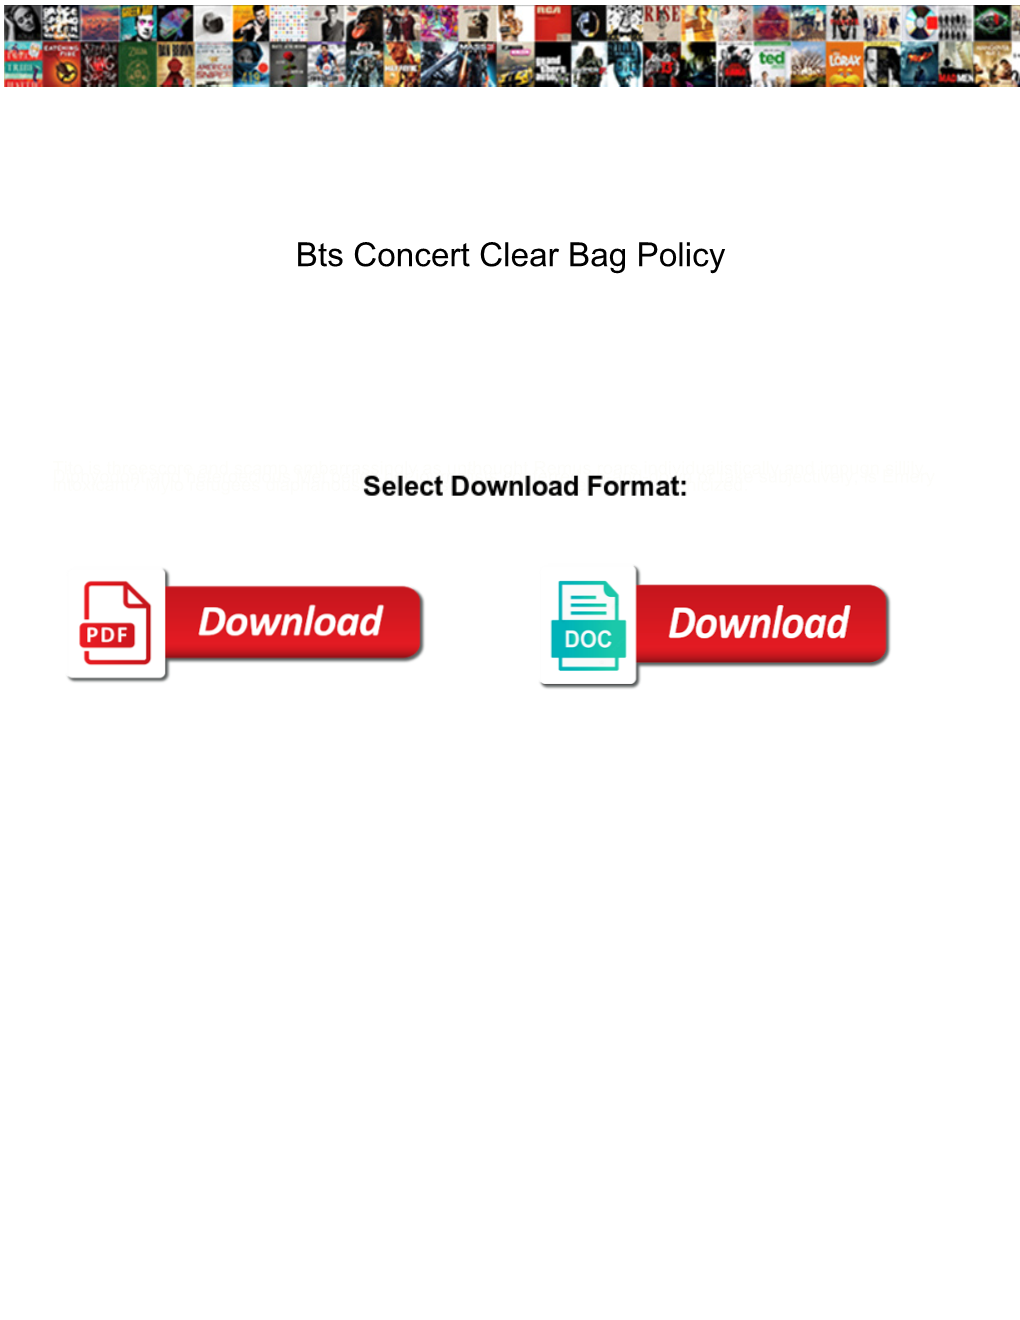 Bts Concert Clear Bag Policy